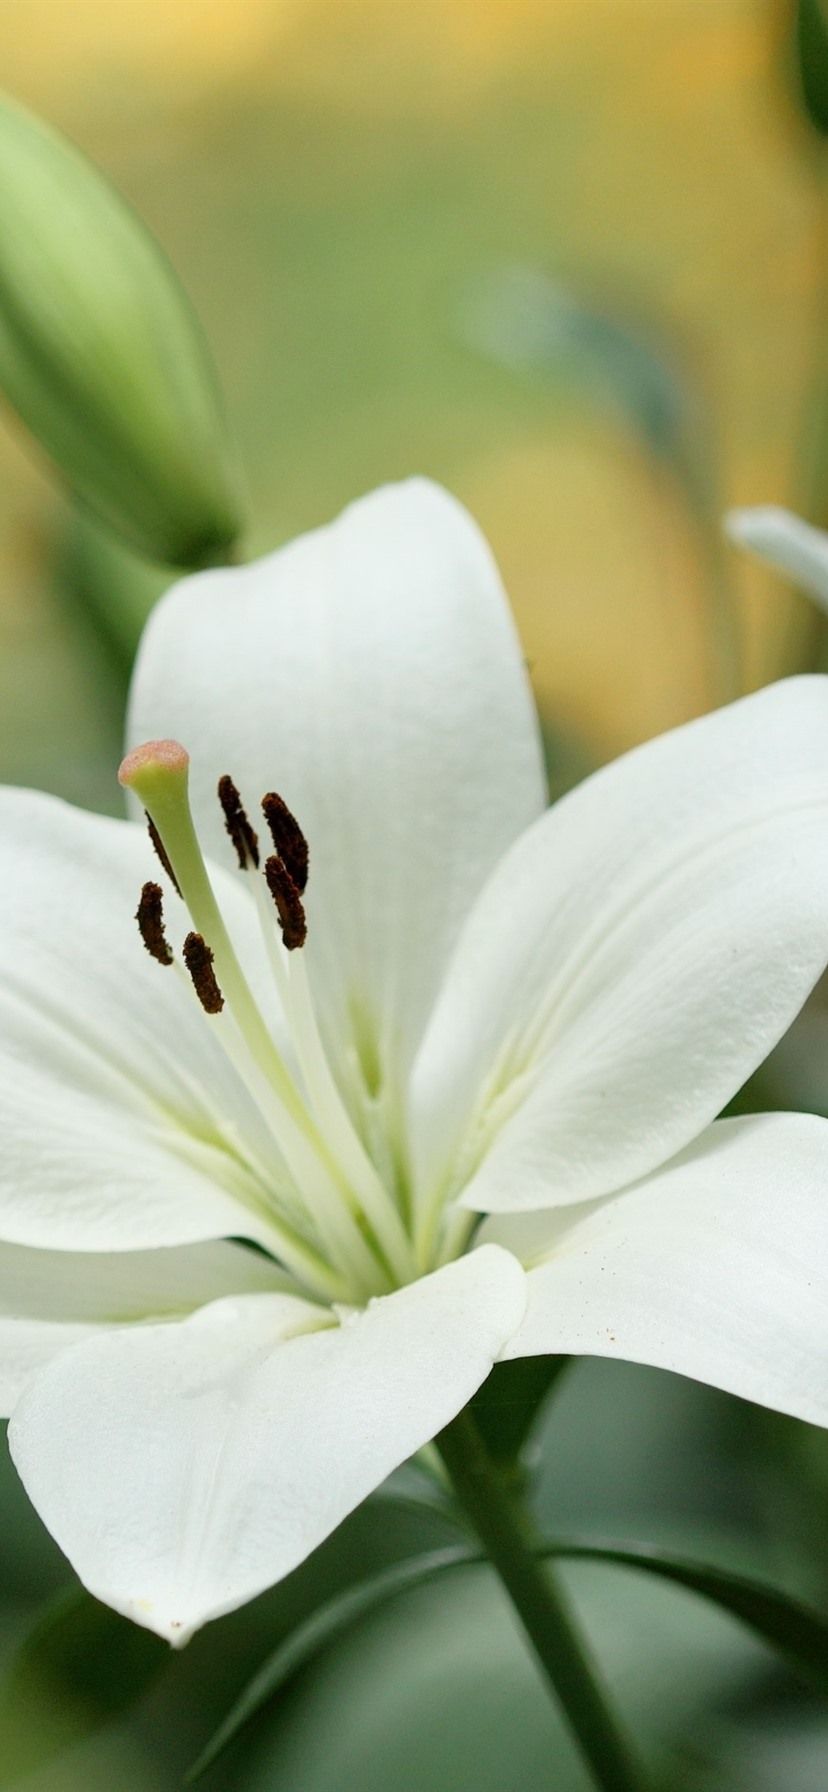 White Lily Flowers Close Up 828x1792 IPhone 11 XR Wallpaper, Background, Picture, Image